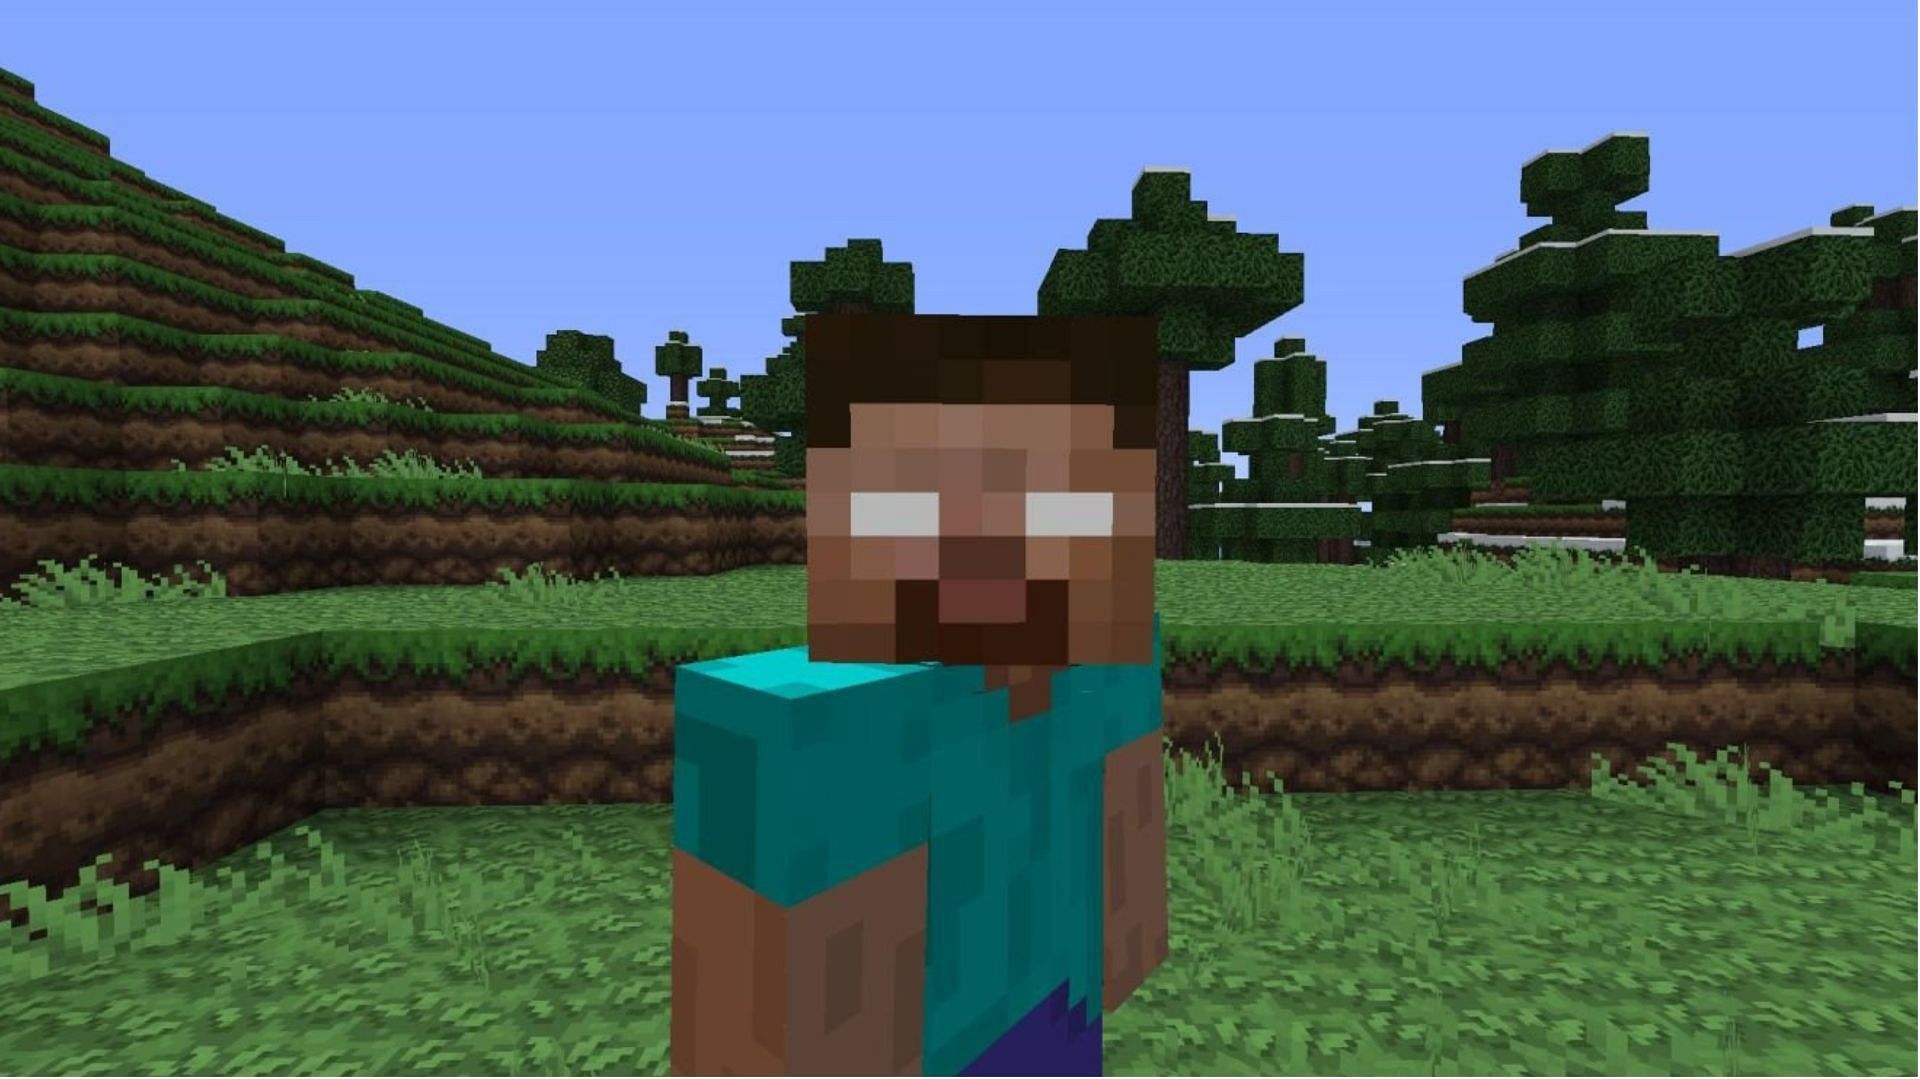 Herobrine from Minecraft is one most popular urban myths in video games (Image via Mojang)